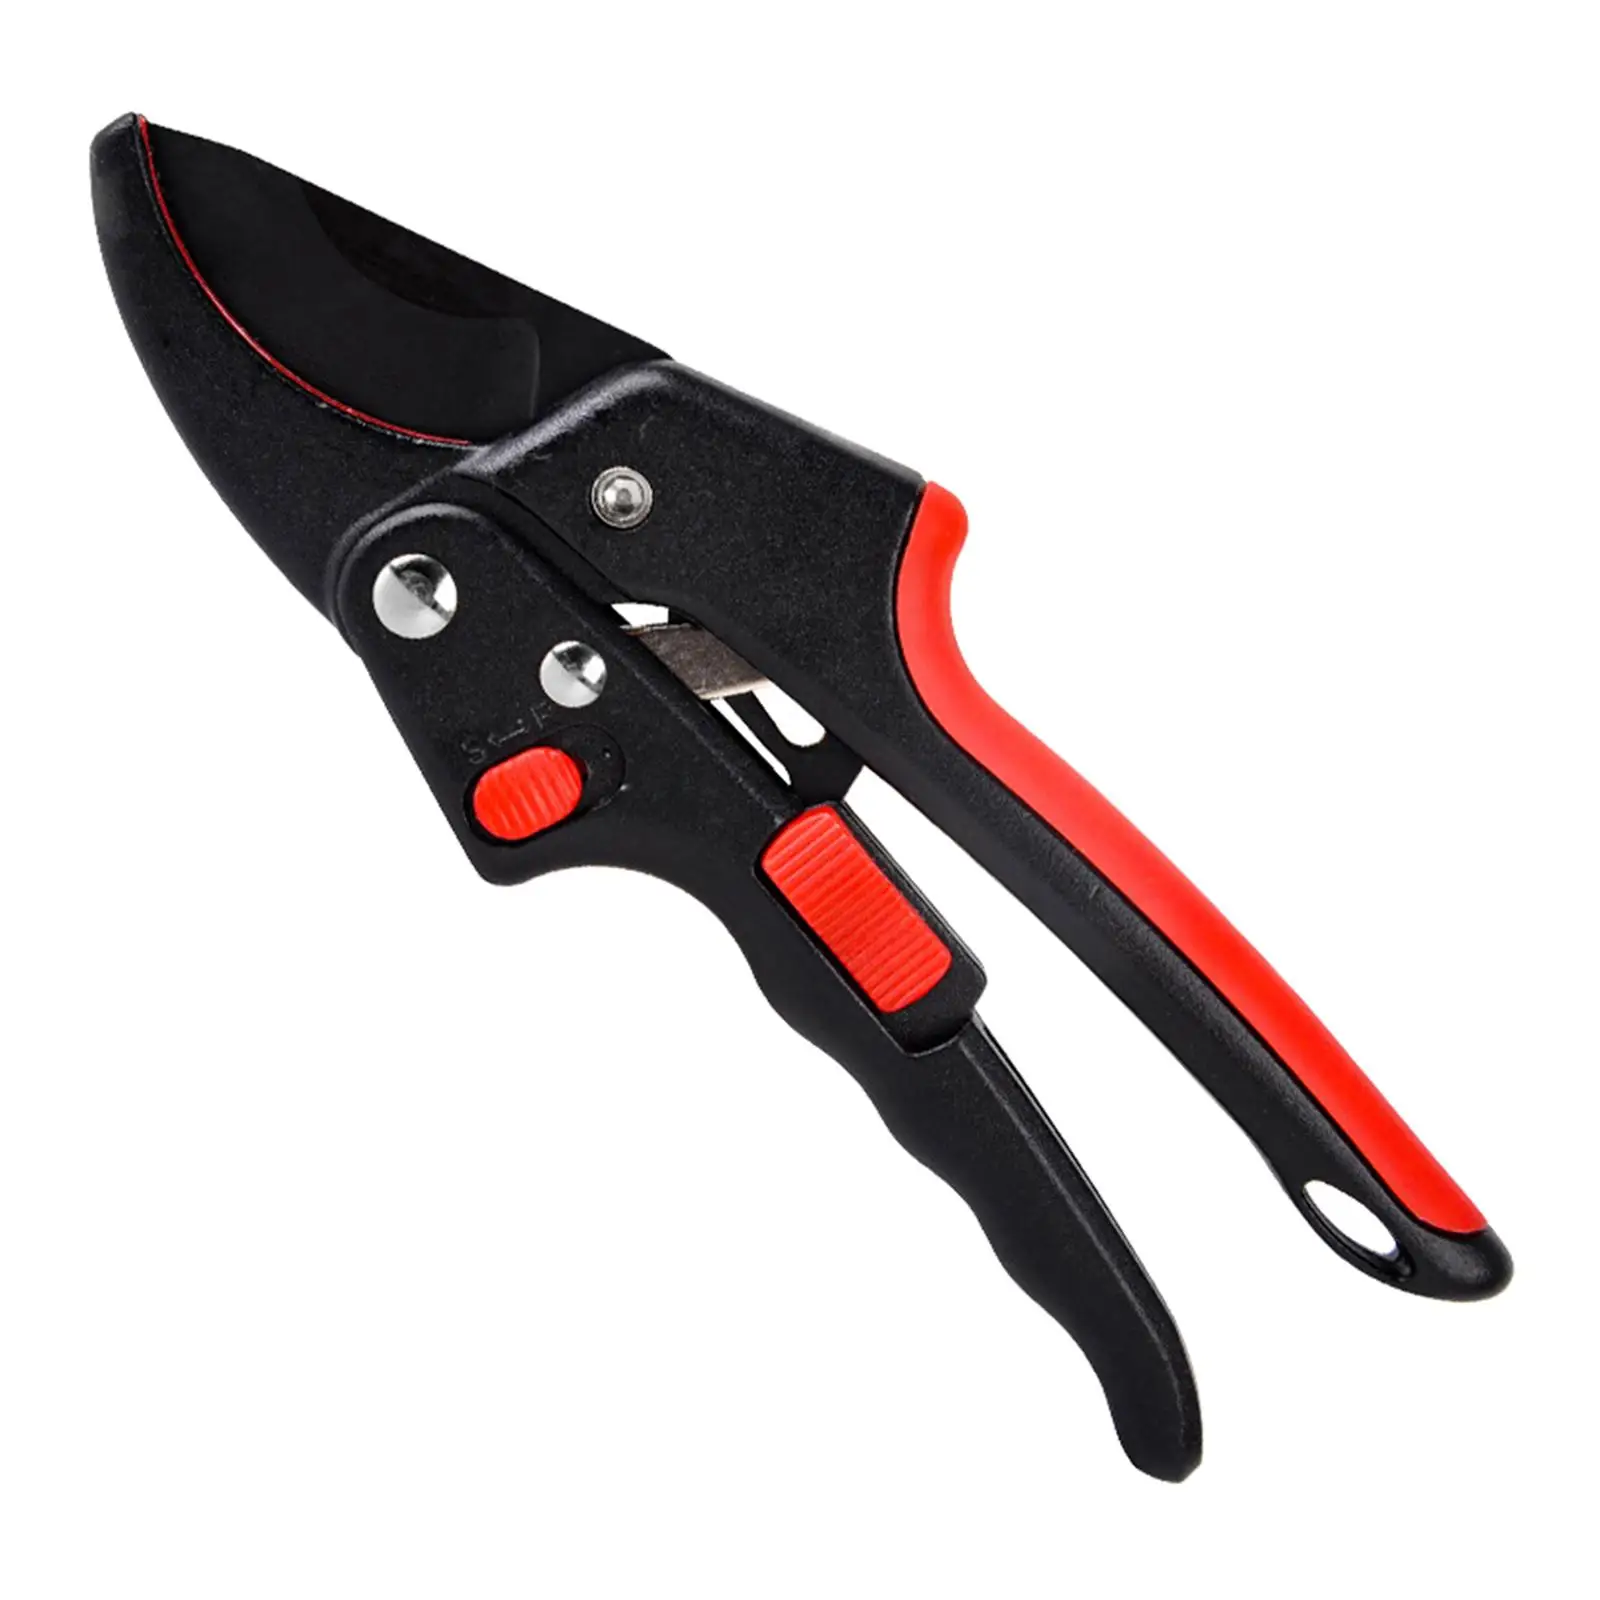 Ratchet Pruning Shear Pruning Tool Gardening Equipment Garden Pruners Hand Pruning Shear Garden Clippers for Orchard Bonsai